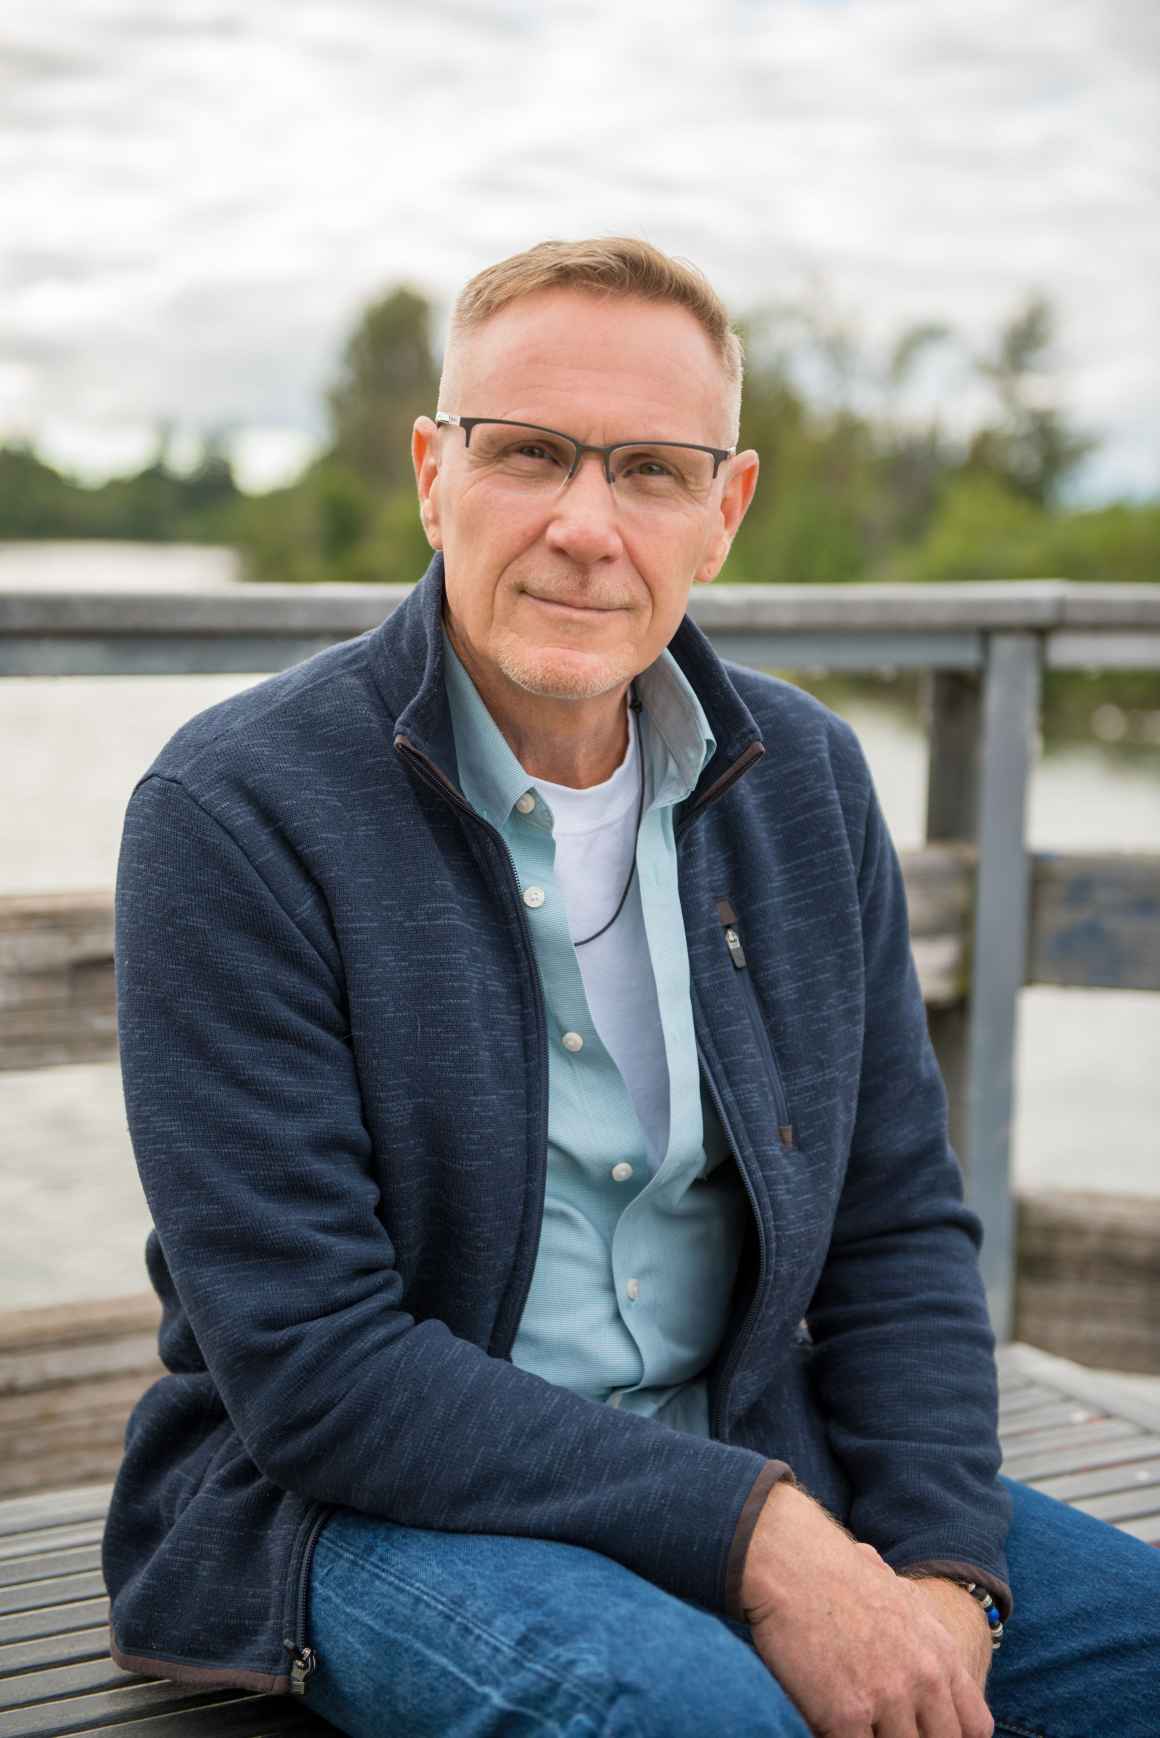 A portrait of our client, John Cavanaugh, a middle aged white man wearing glasses, a blue button up, and a gray cardigan, sitting on a bench with his hands clasped, softly smiling